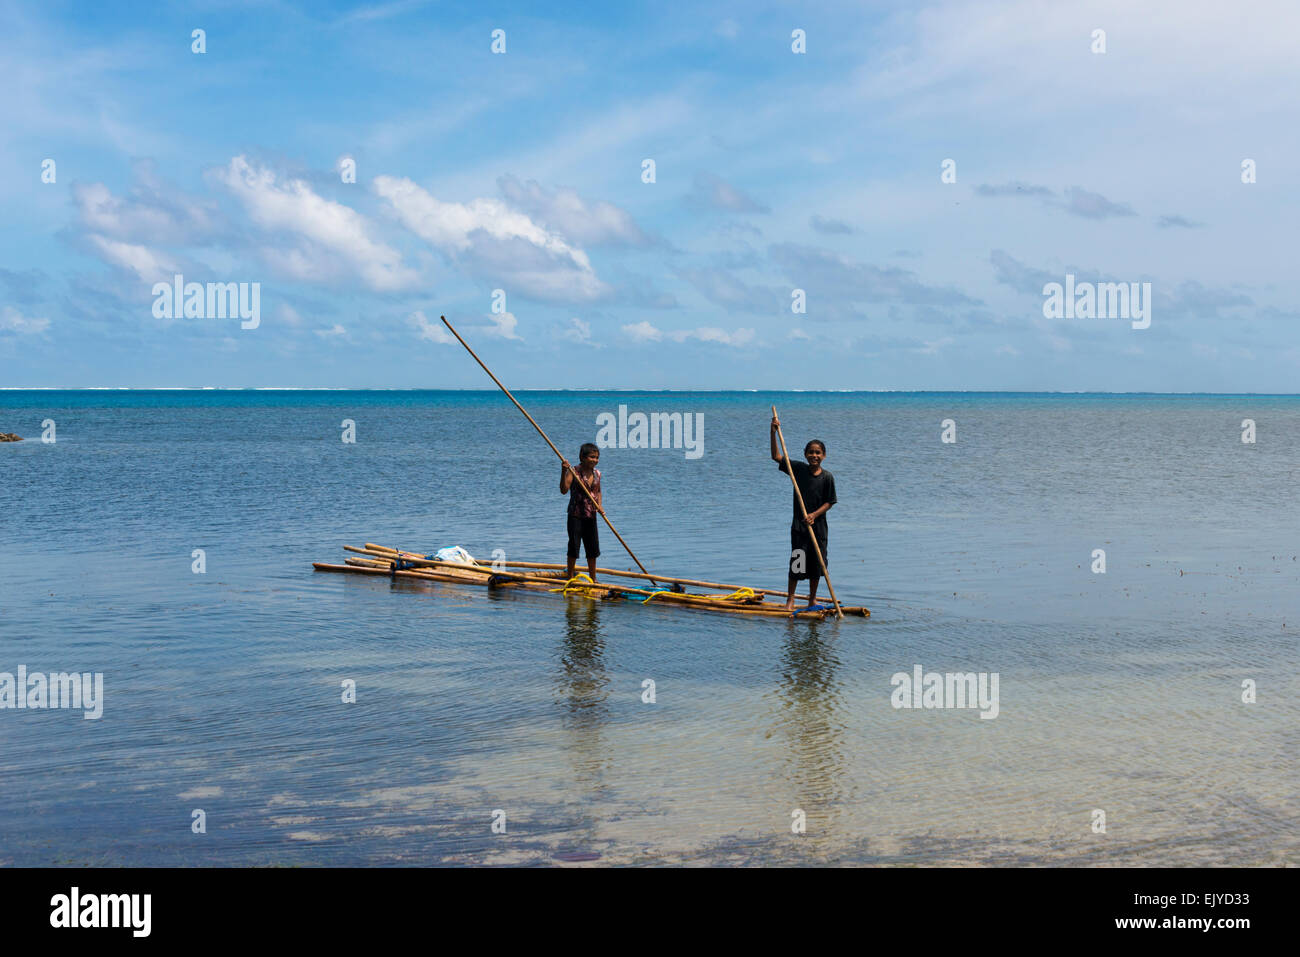 Boys rowing bamboo raft on the ocean, Yap Island, Federated States of Micronesia Stock Photo